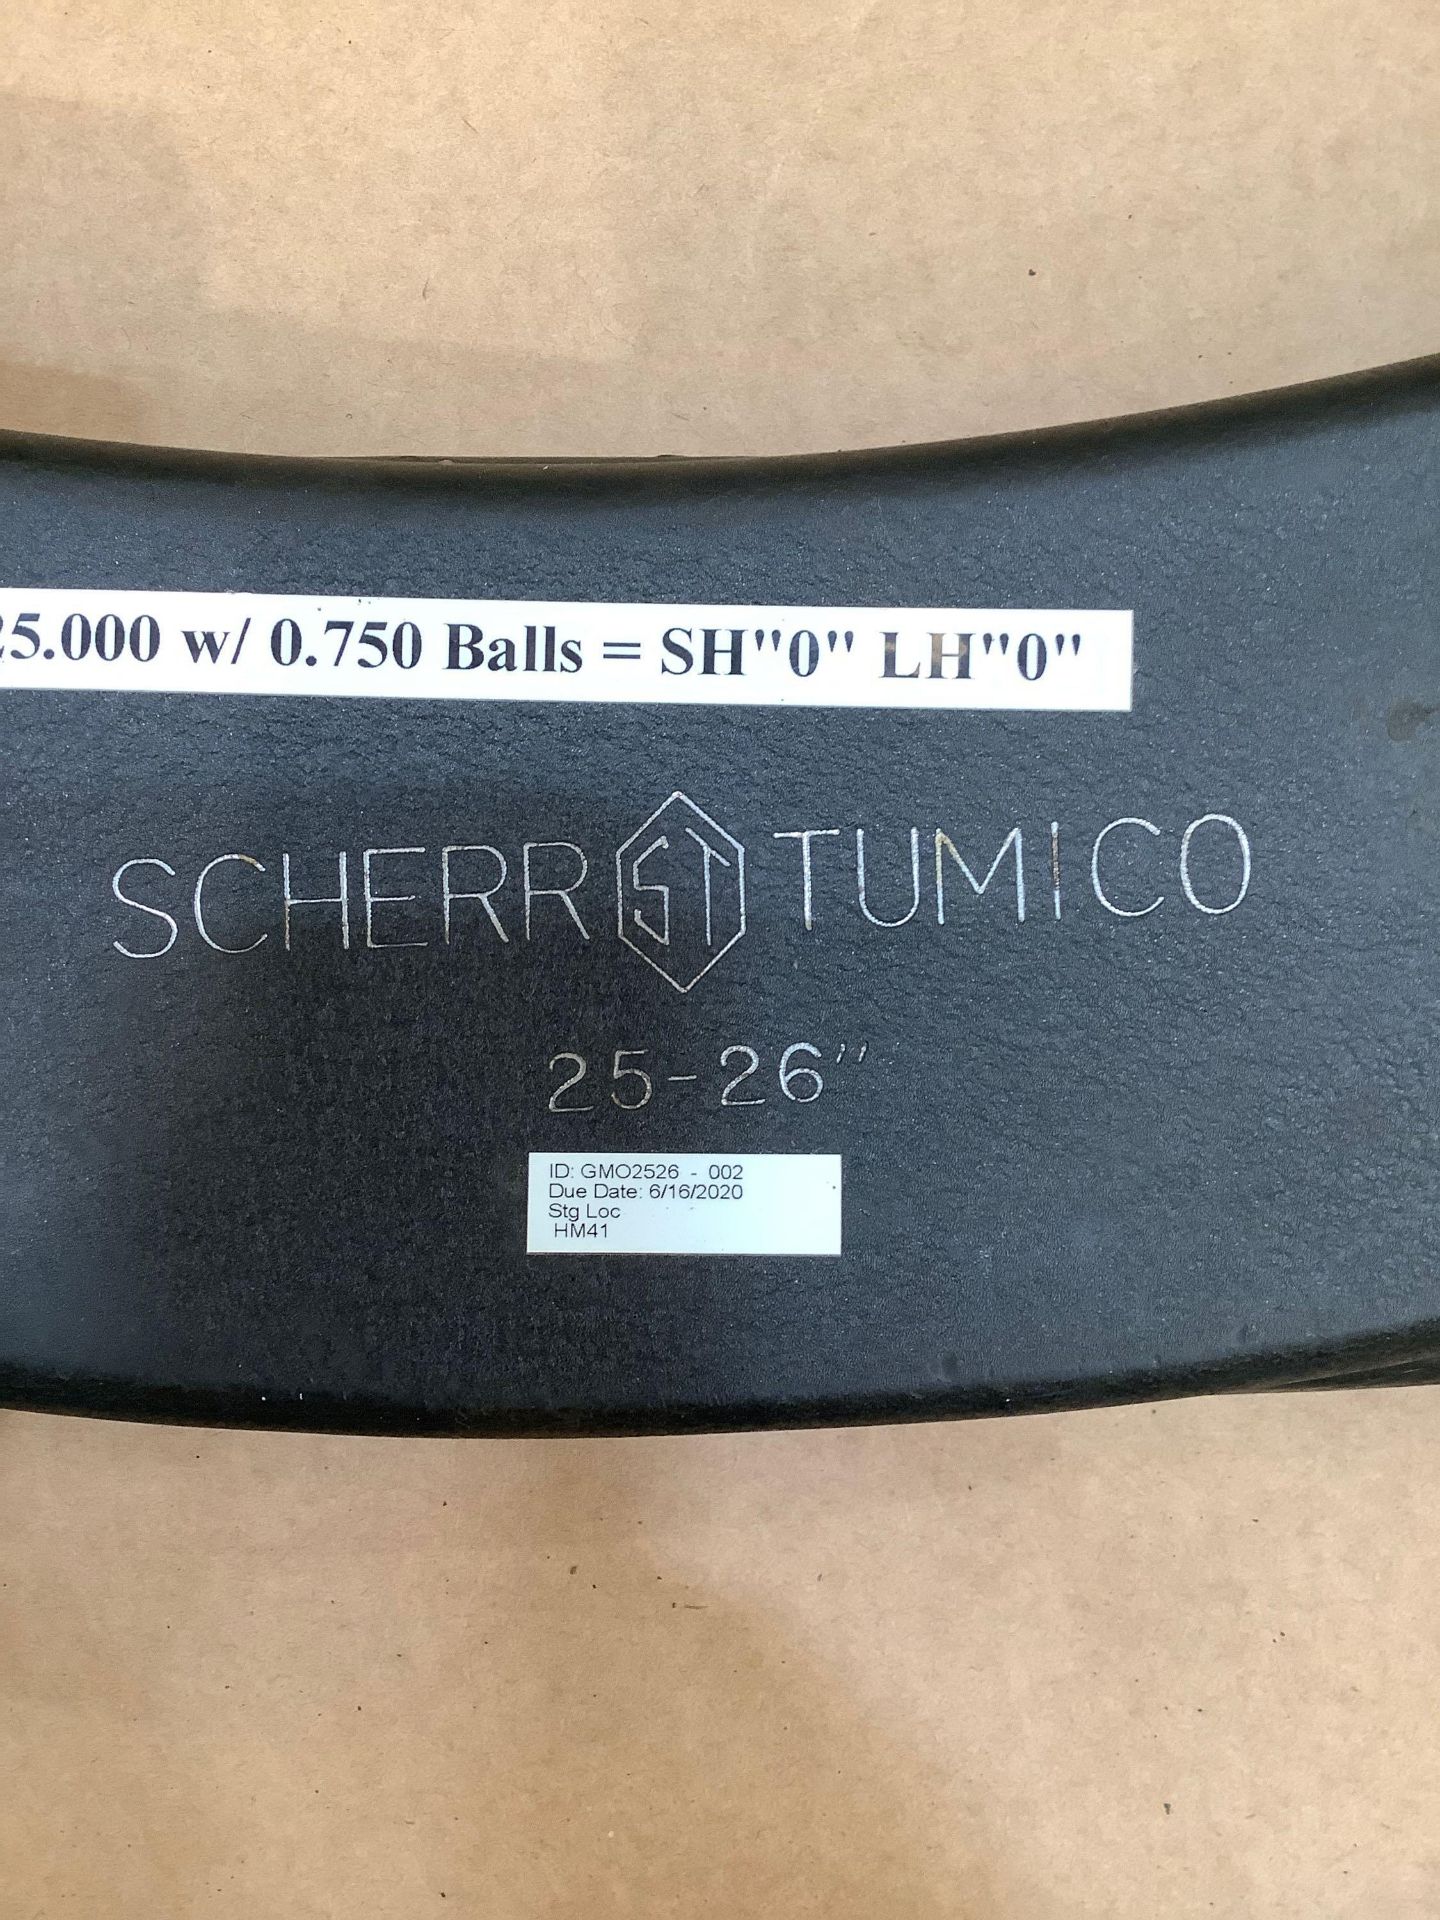 Lot of 3: Scheer-Tumico O.D. Micrometers - Image 2 of 4